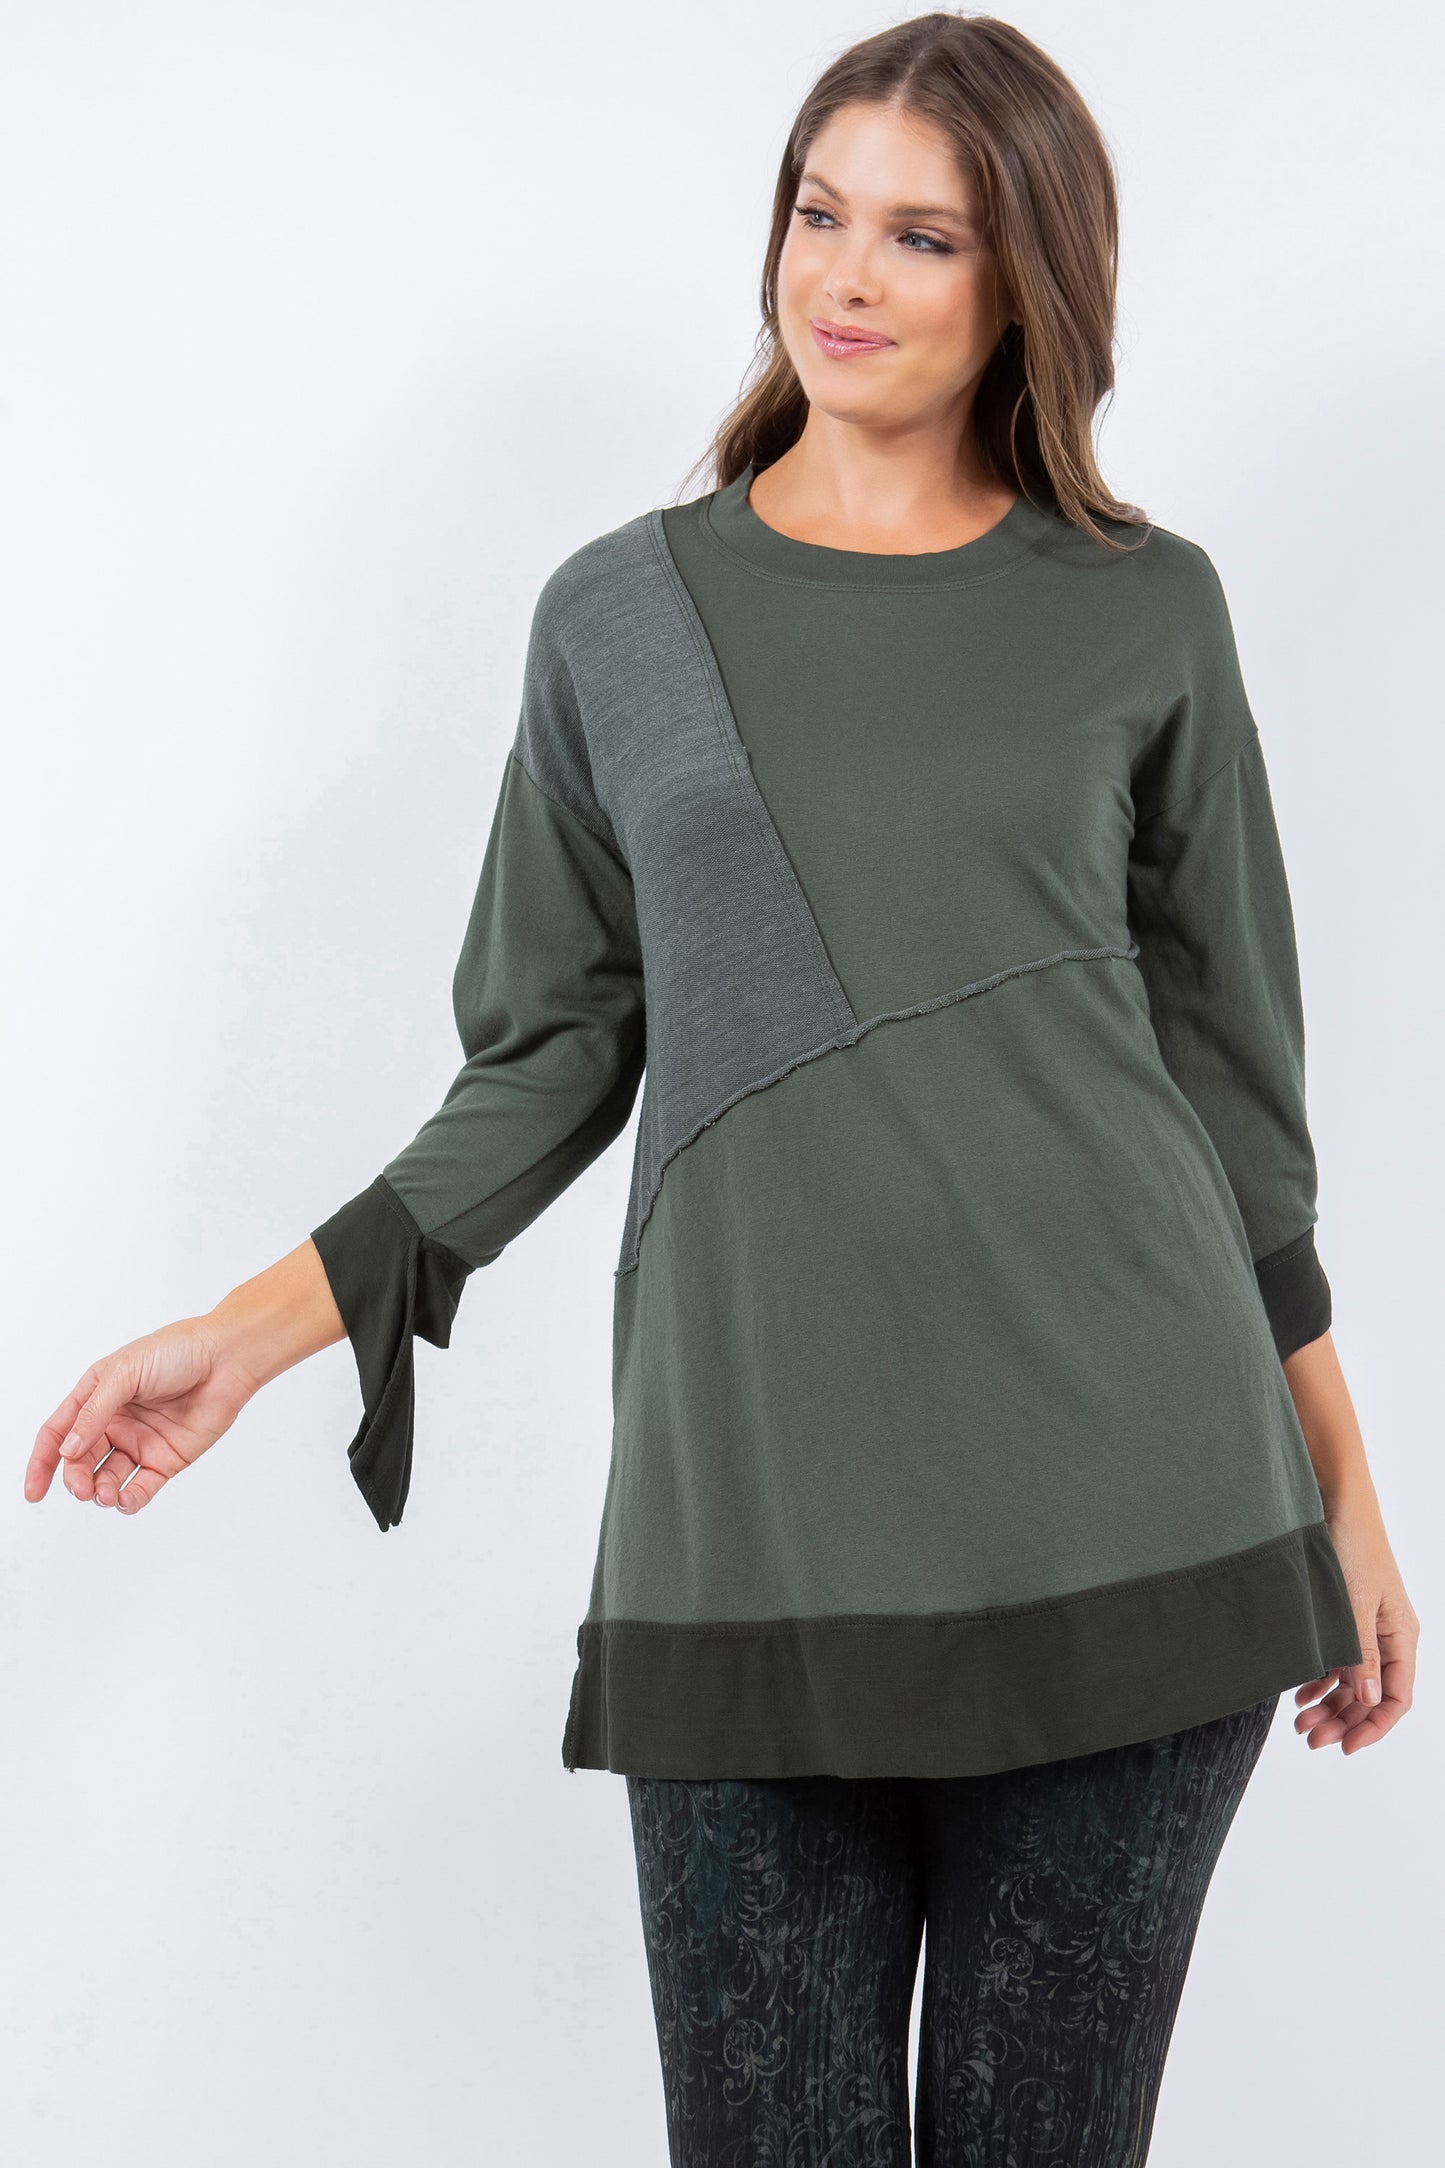 Asymmetrical Baby French Terry Tunic